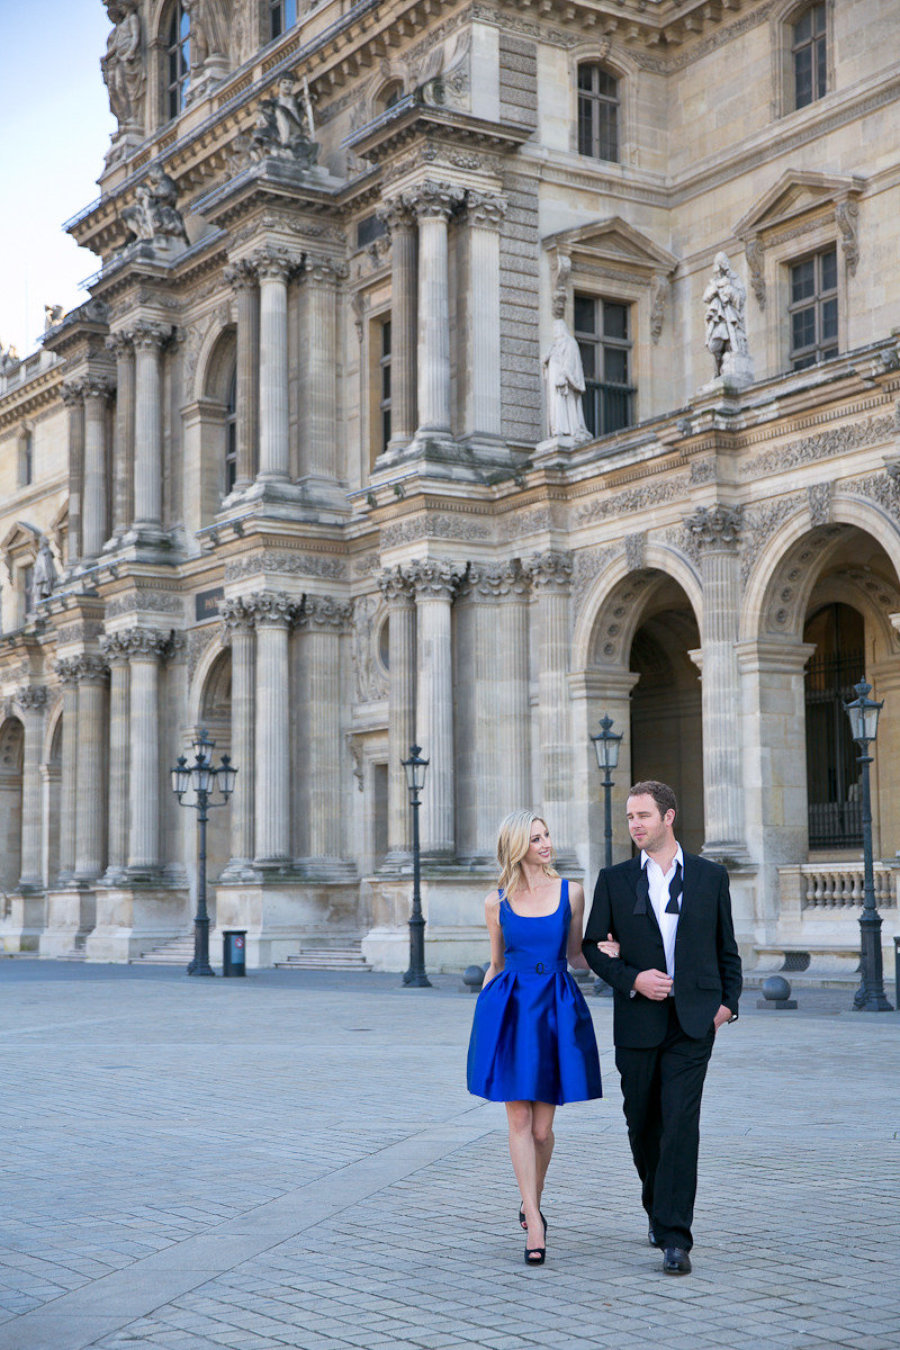 Parisian Engagement Session. One and Only Paris Photography // Don't know what to wear for your engagement pictures? Check out these 10 Formal Engagement Photo Outfit Ideas. // https://mysweetengagement.com